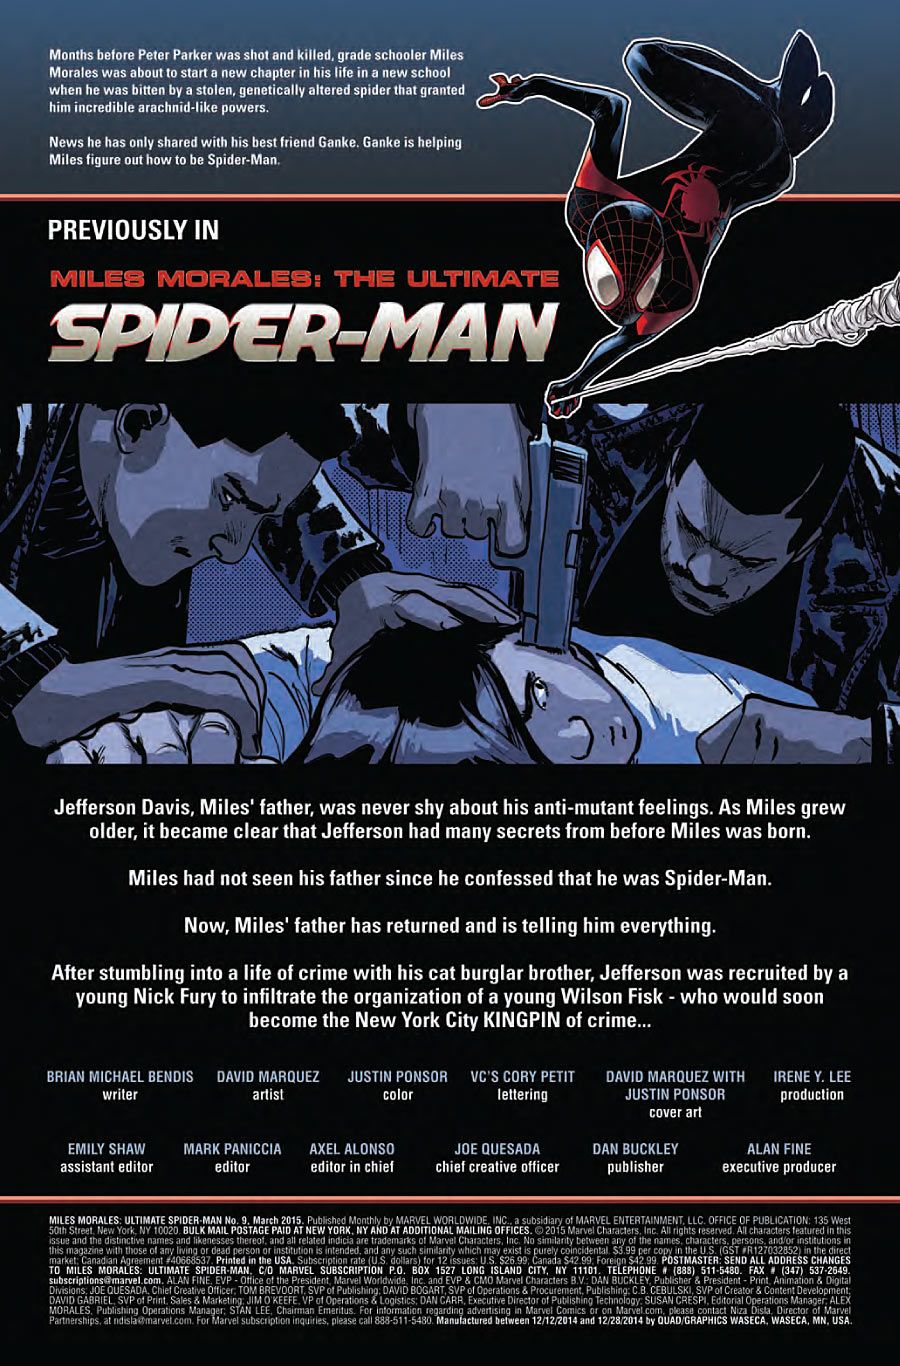 Miles Morales: The Ultimate Spider-Man #9